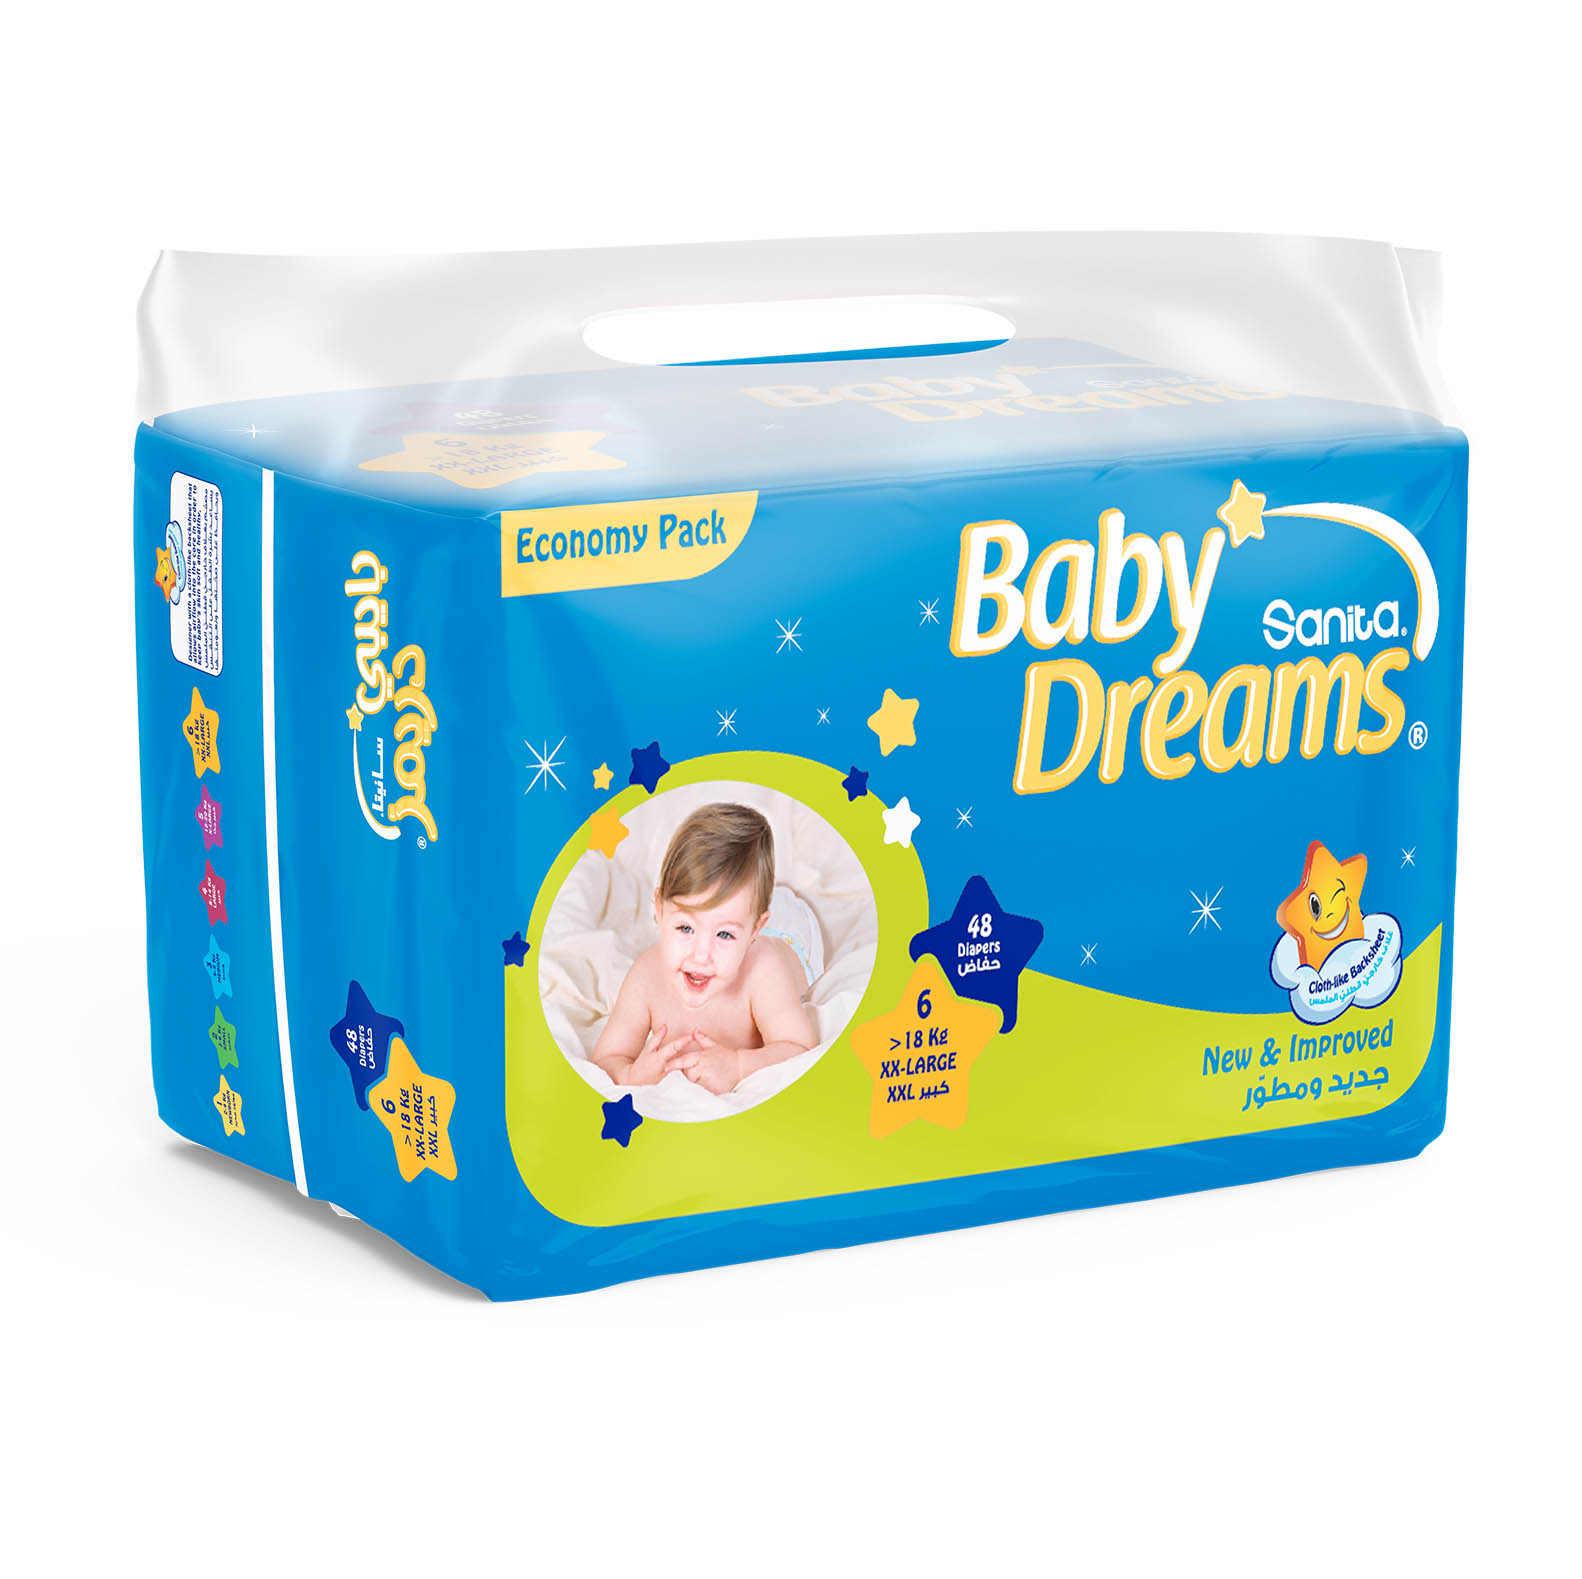 Happies Lebanon - Sweet dreams, sleep tight and have a very good night! 🌙☁  This is how your child's night will be with Happies! 12 hours of dryness  guaranteed #Happies #Diapers #Baby #